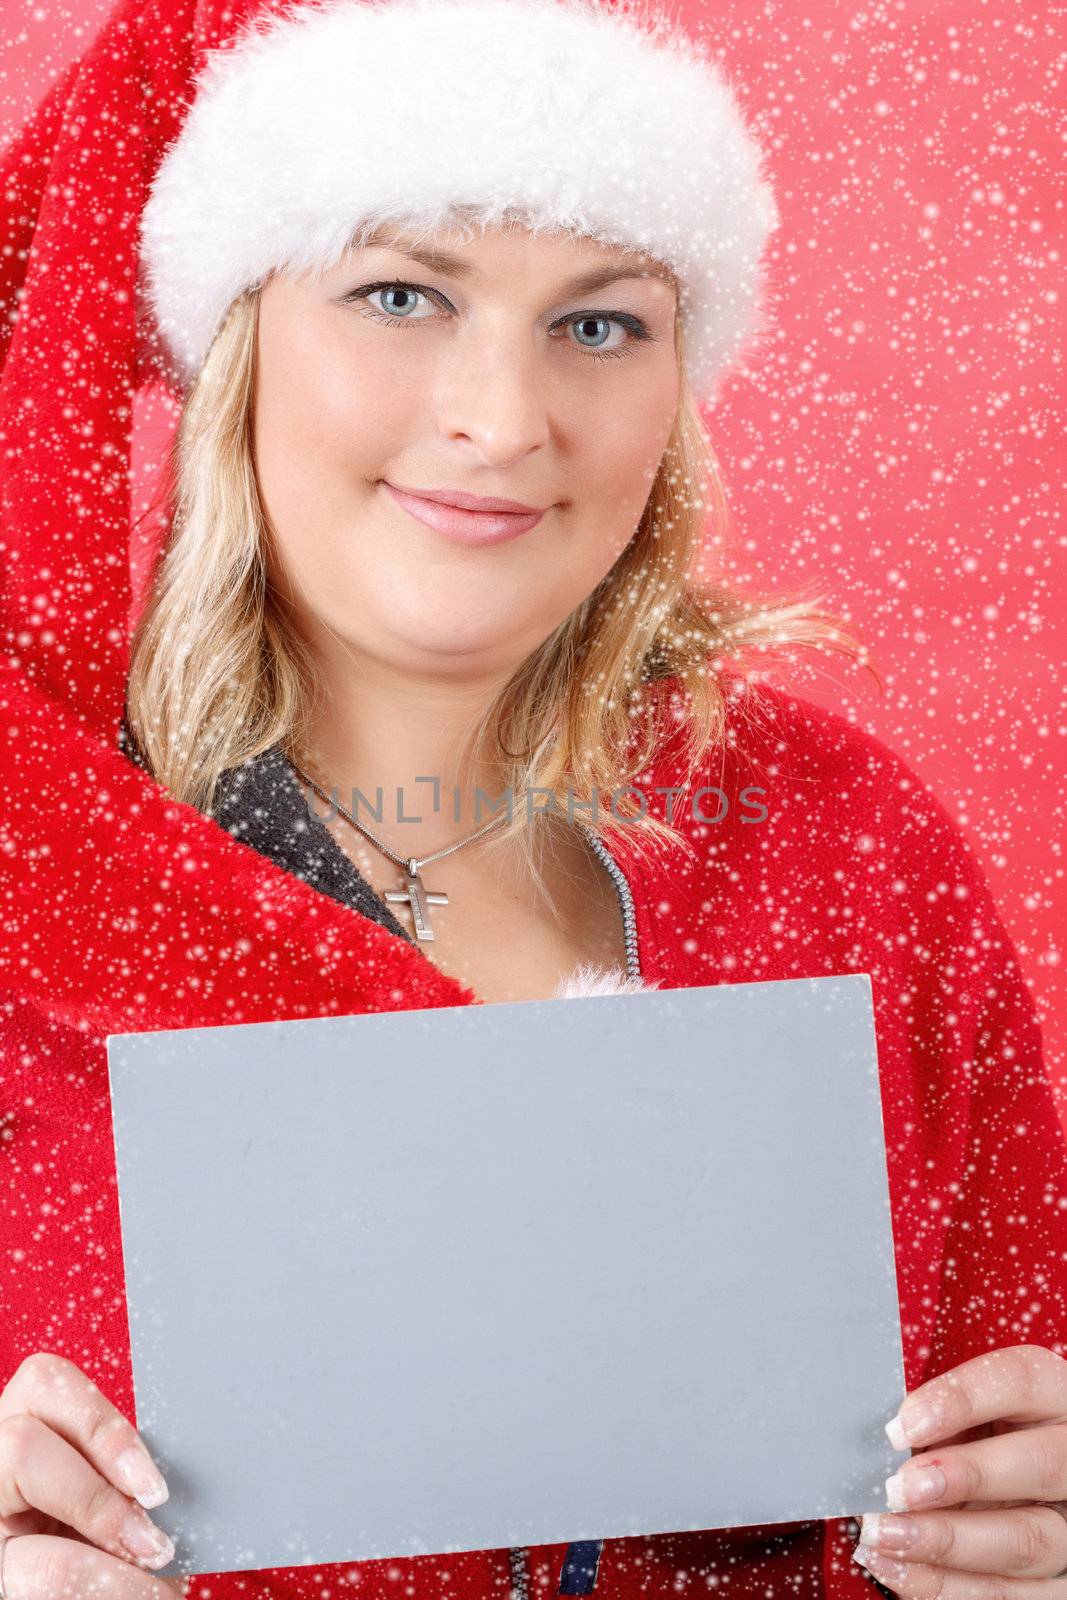 Joyful pretty woman in red santa claus hat smiling on red background